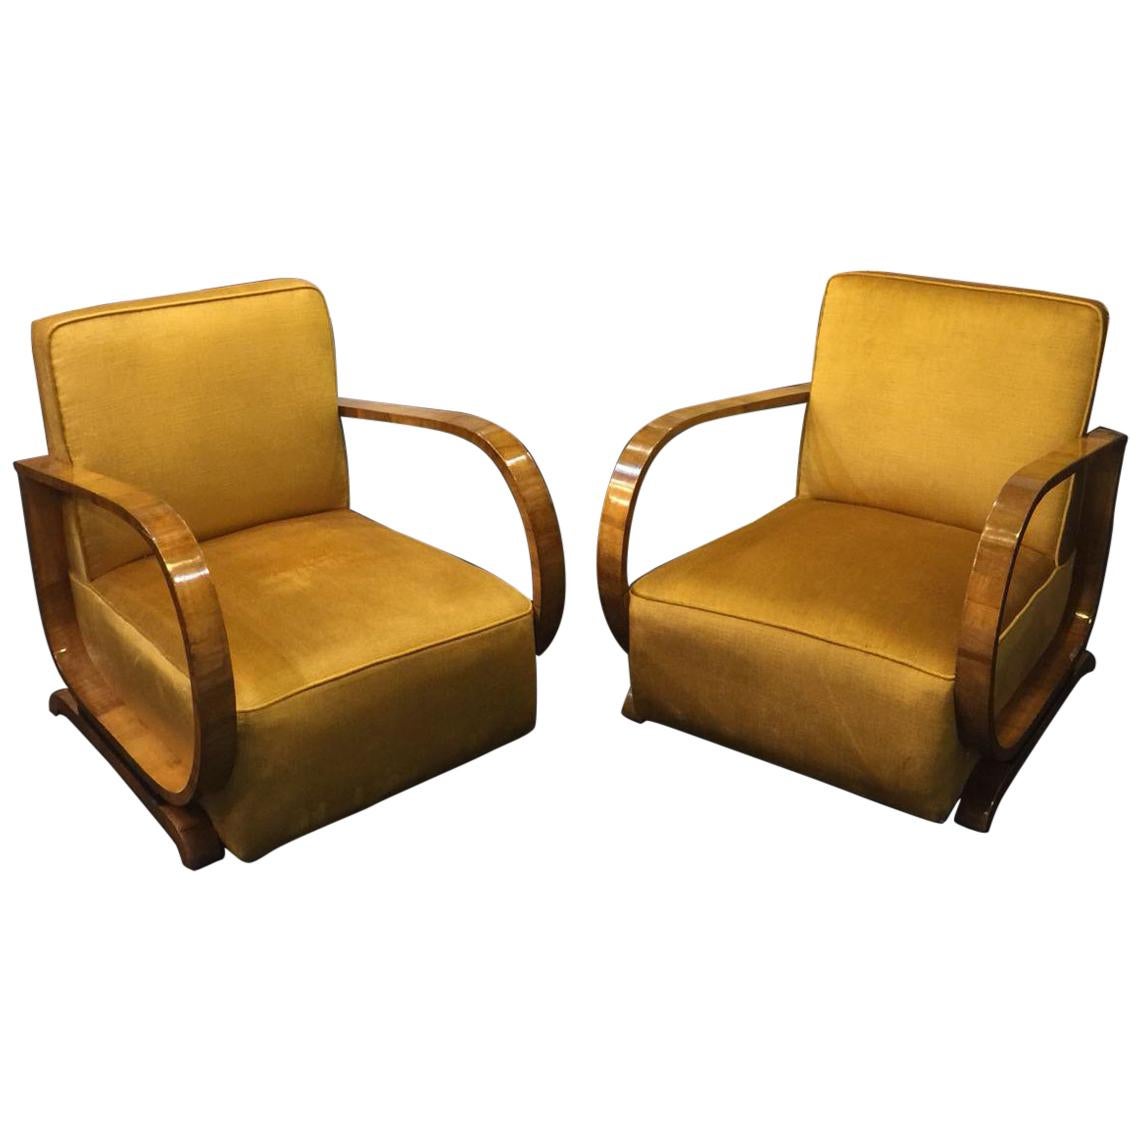 Early 20th Century Déco Armchairs For Sale